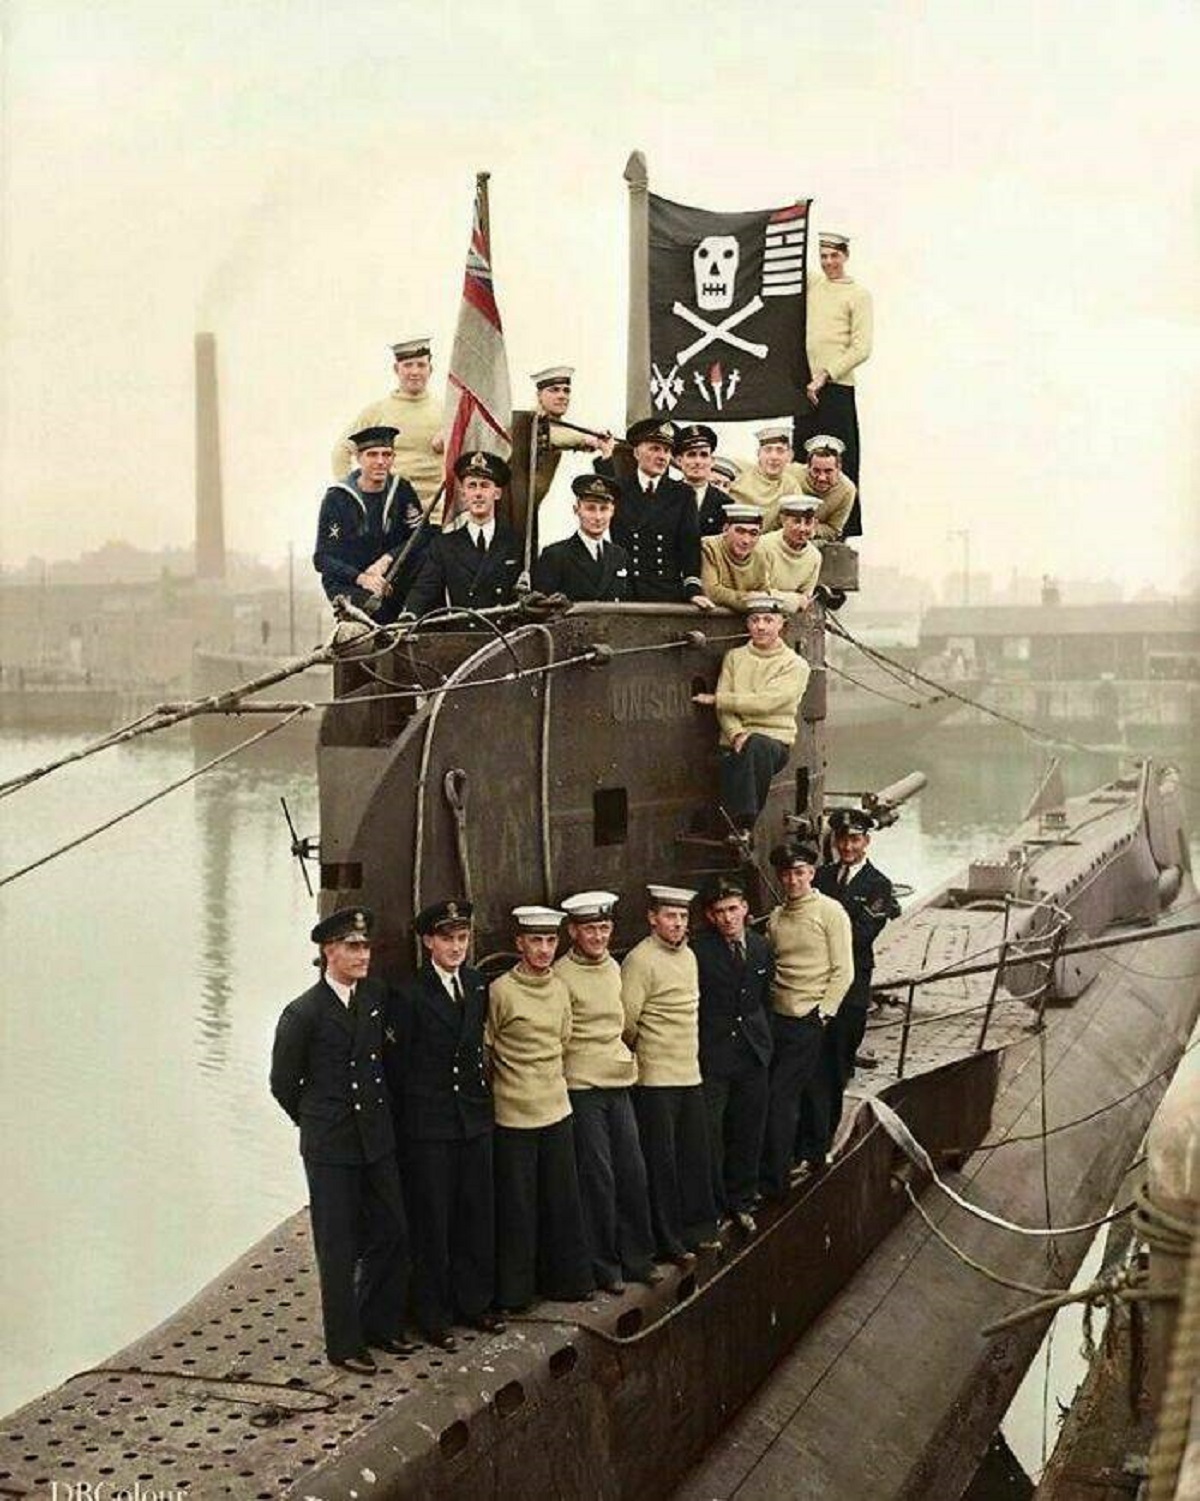 "The Crew Of British Hm Submarine ‘Unison’ Display Their ‘Jolly Roger’ At Devonport, Plymouth, Having Returned From A Successful 16 Months In The Mediterranean. 1943, World War II"